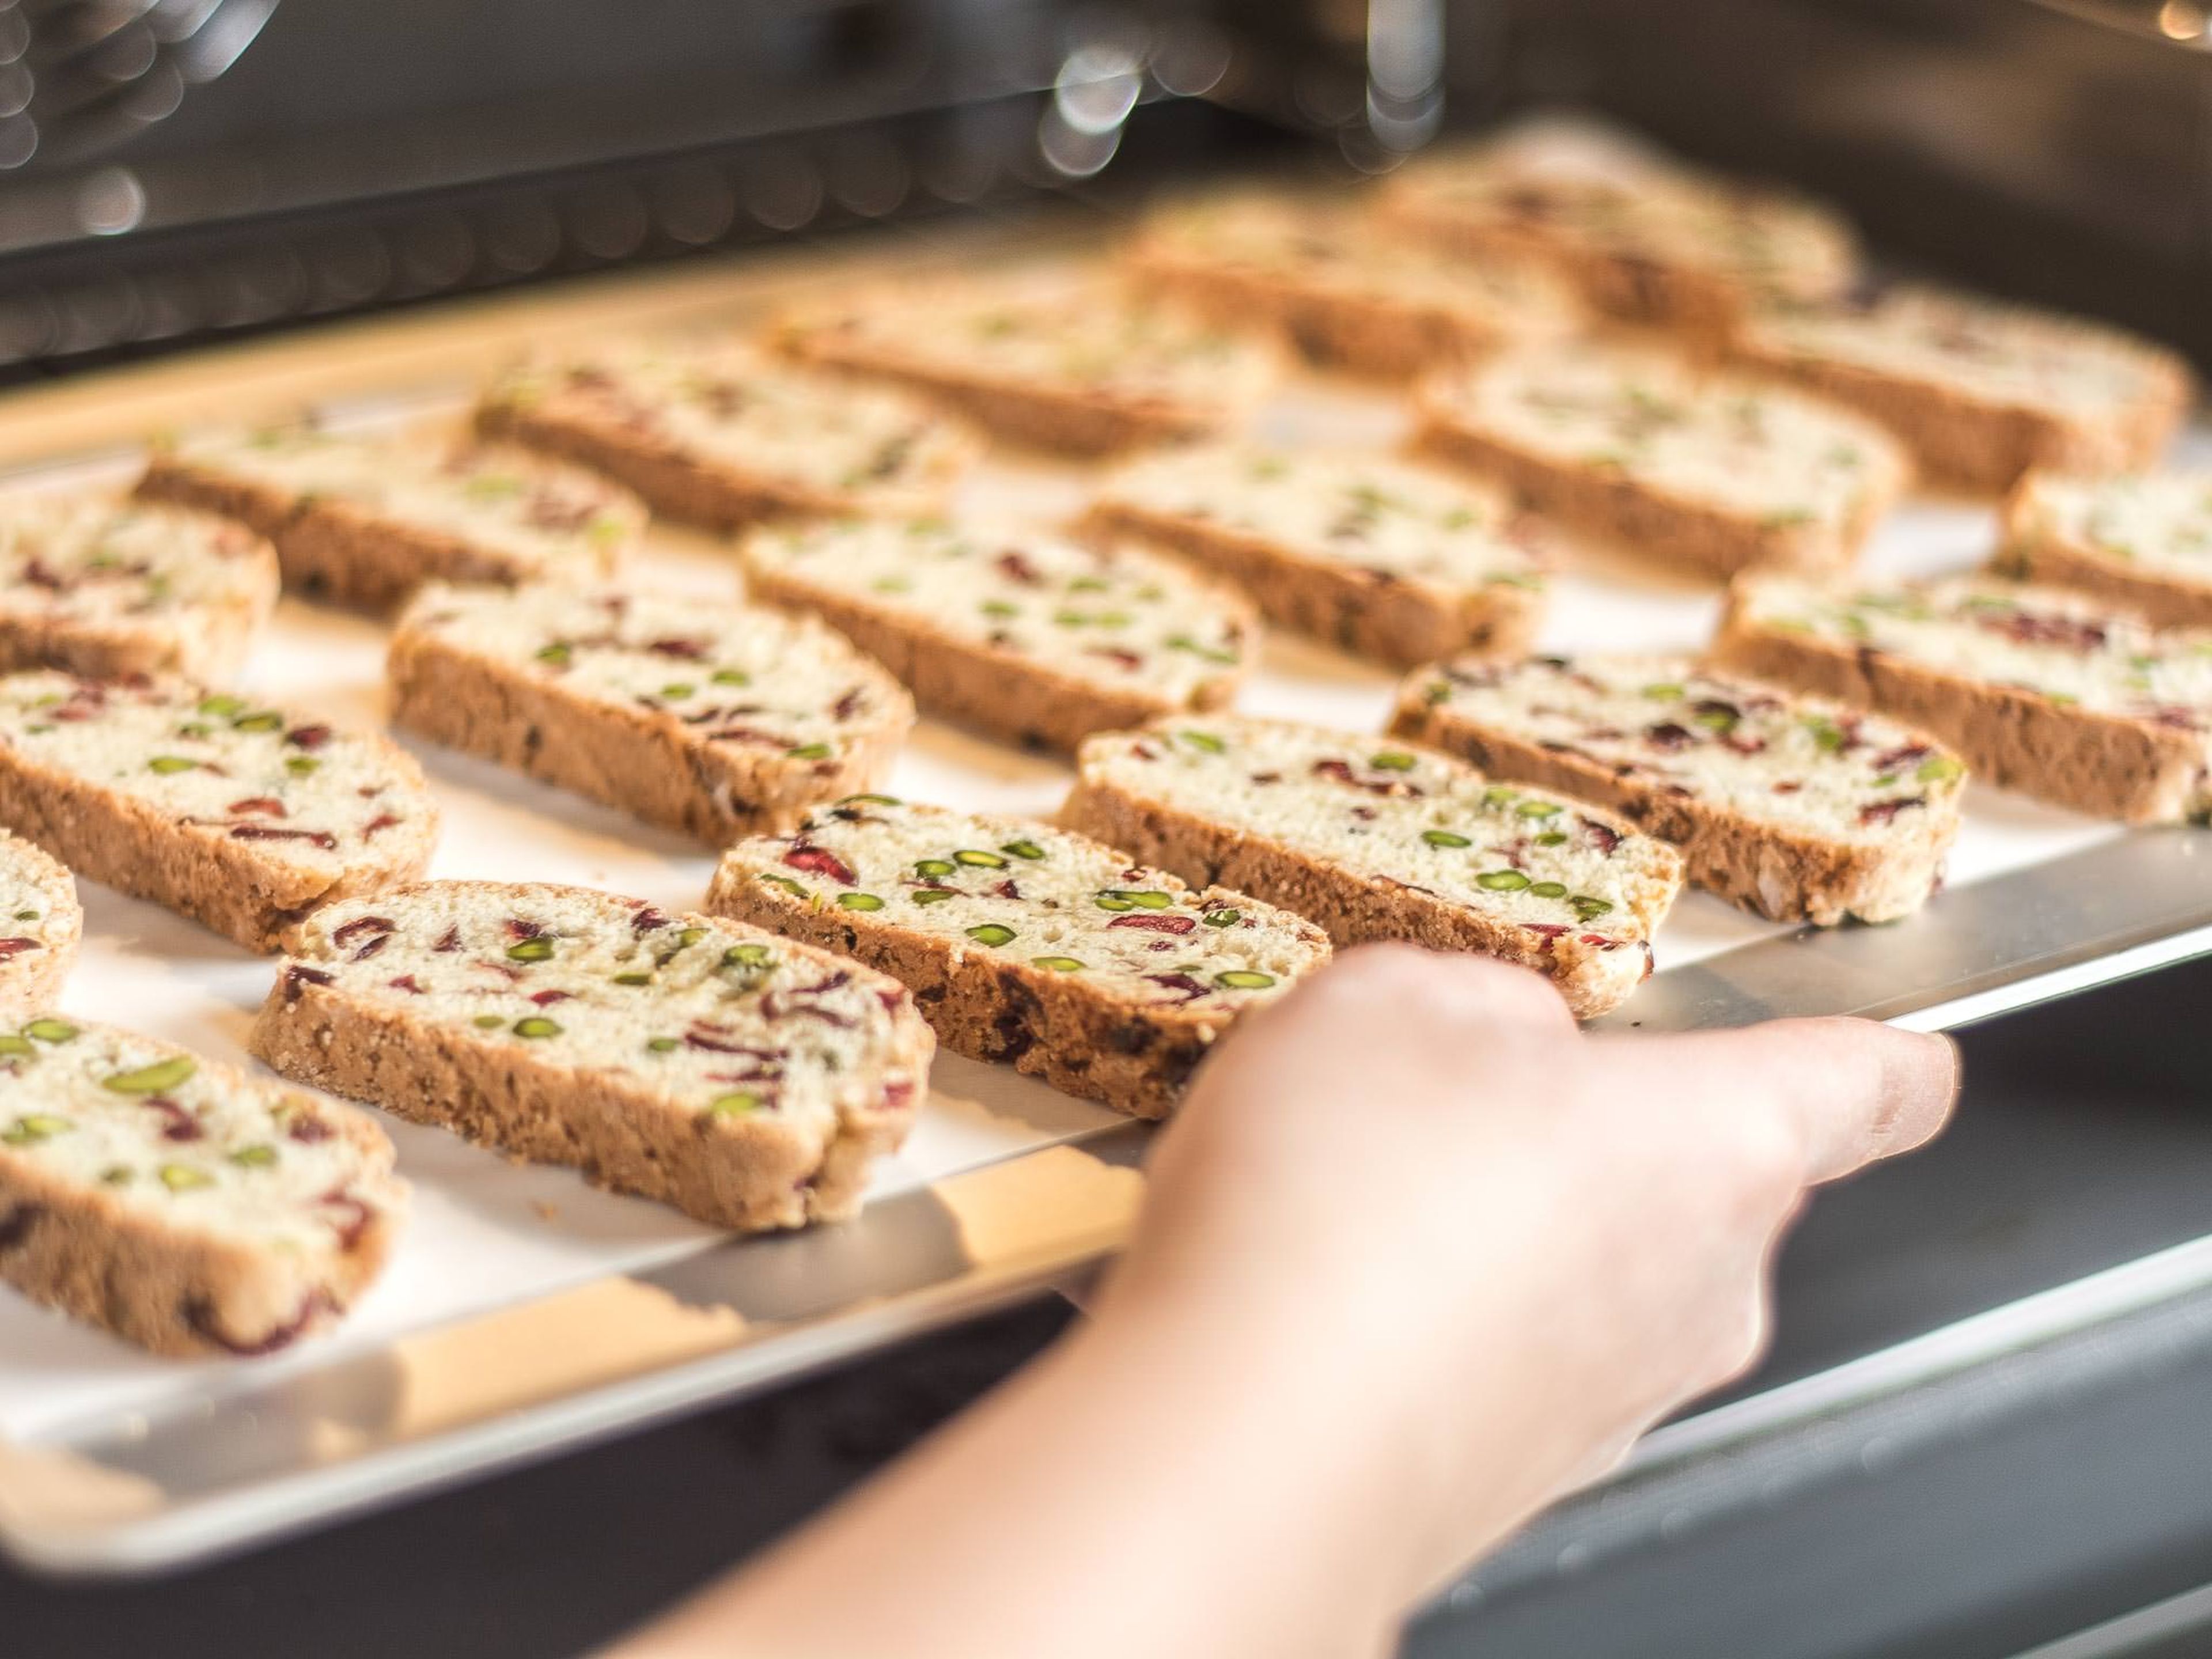 Bake the biscotti on a lined baking tray in a preheated oven at 200°C/ 390°F for an additional 8 min. until crispy. Allow to cool for approx. 15 min. before serving with homemade compote.